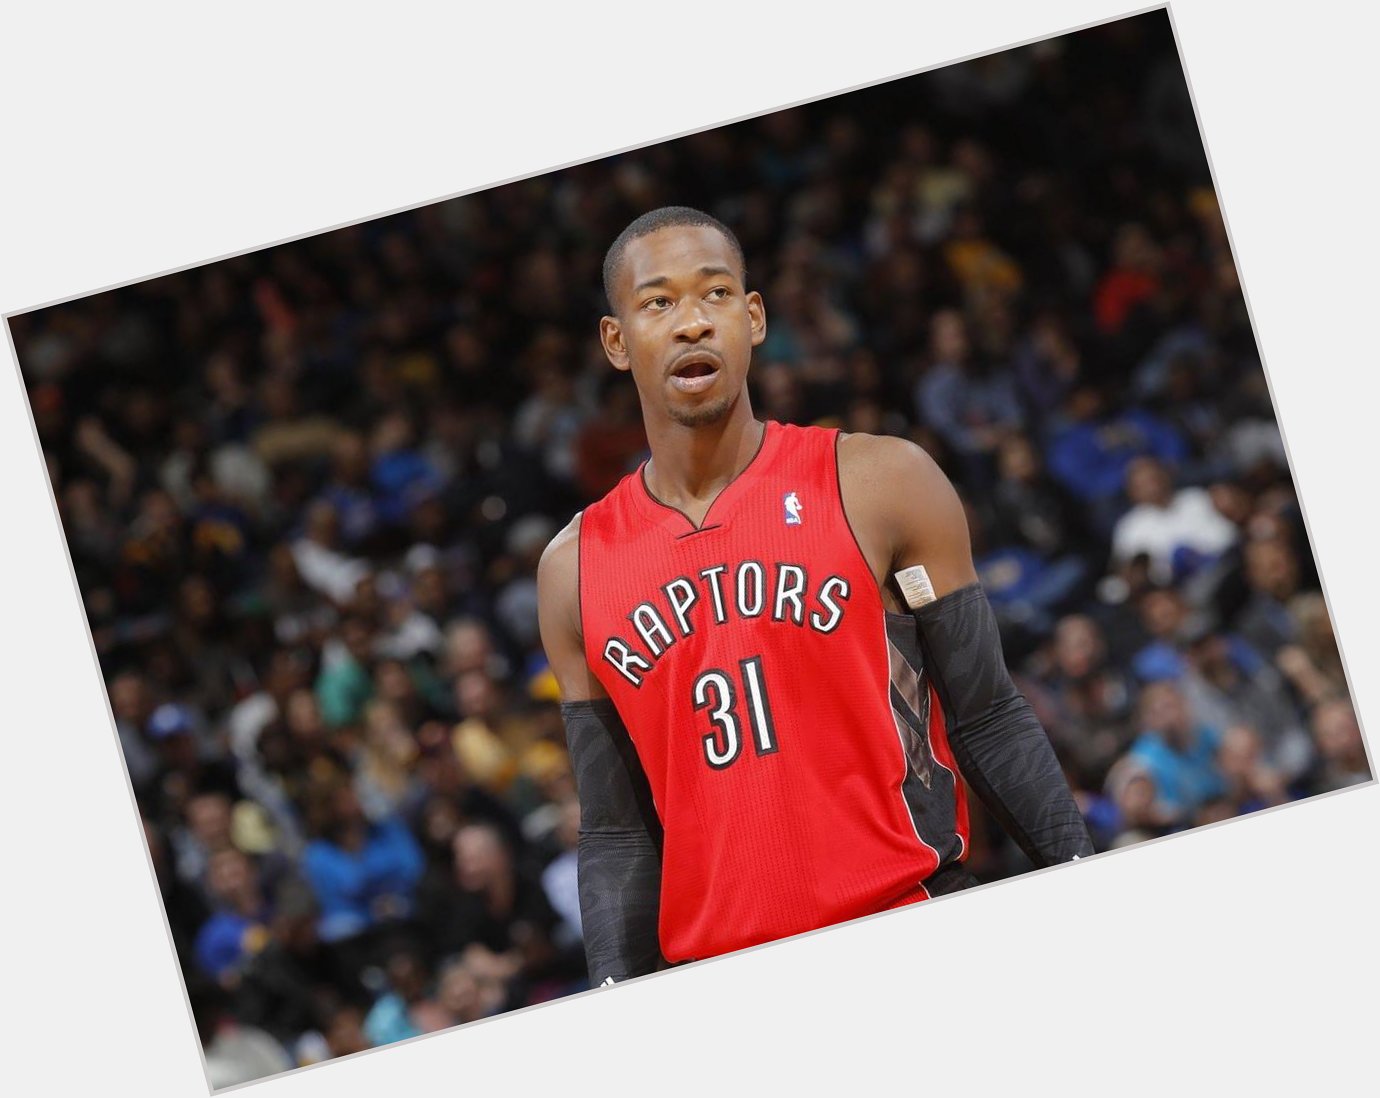 Happy 24th birthday to the one and only Terrence Ross! Congratulations 